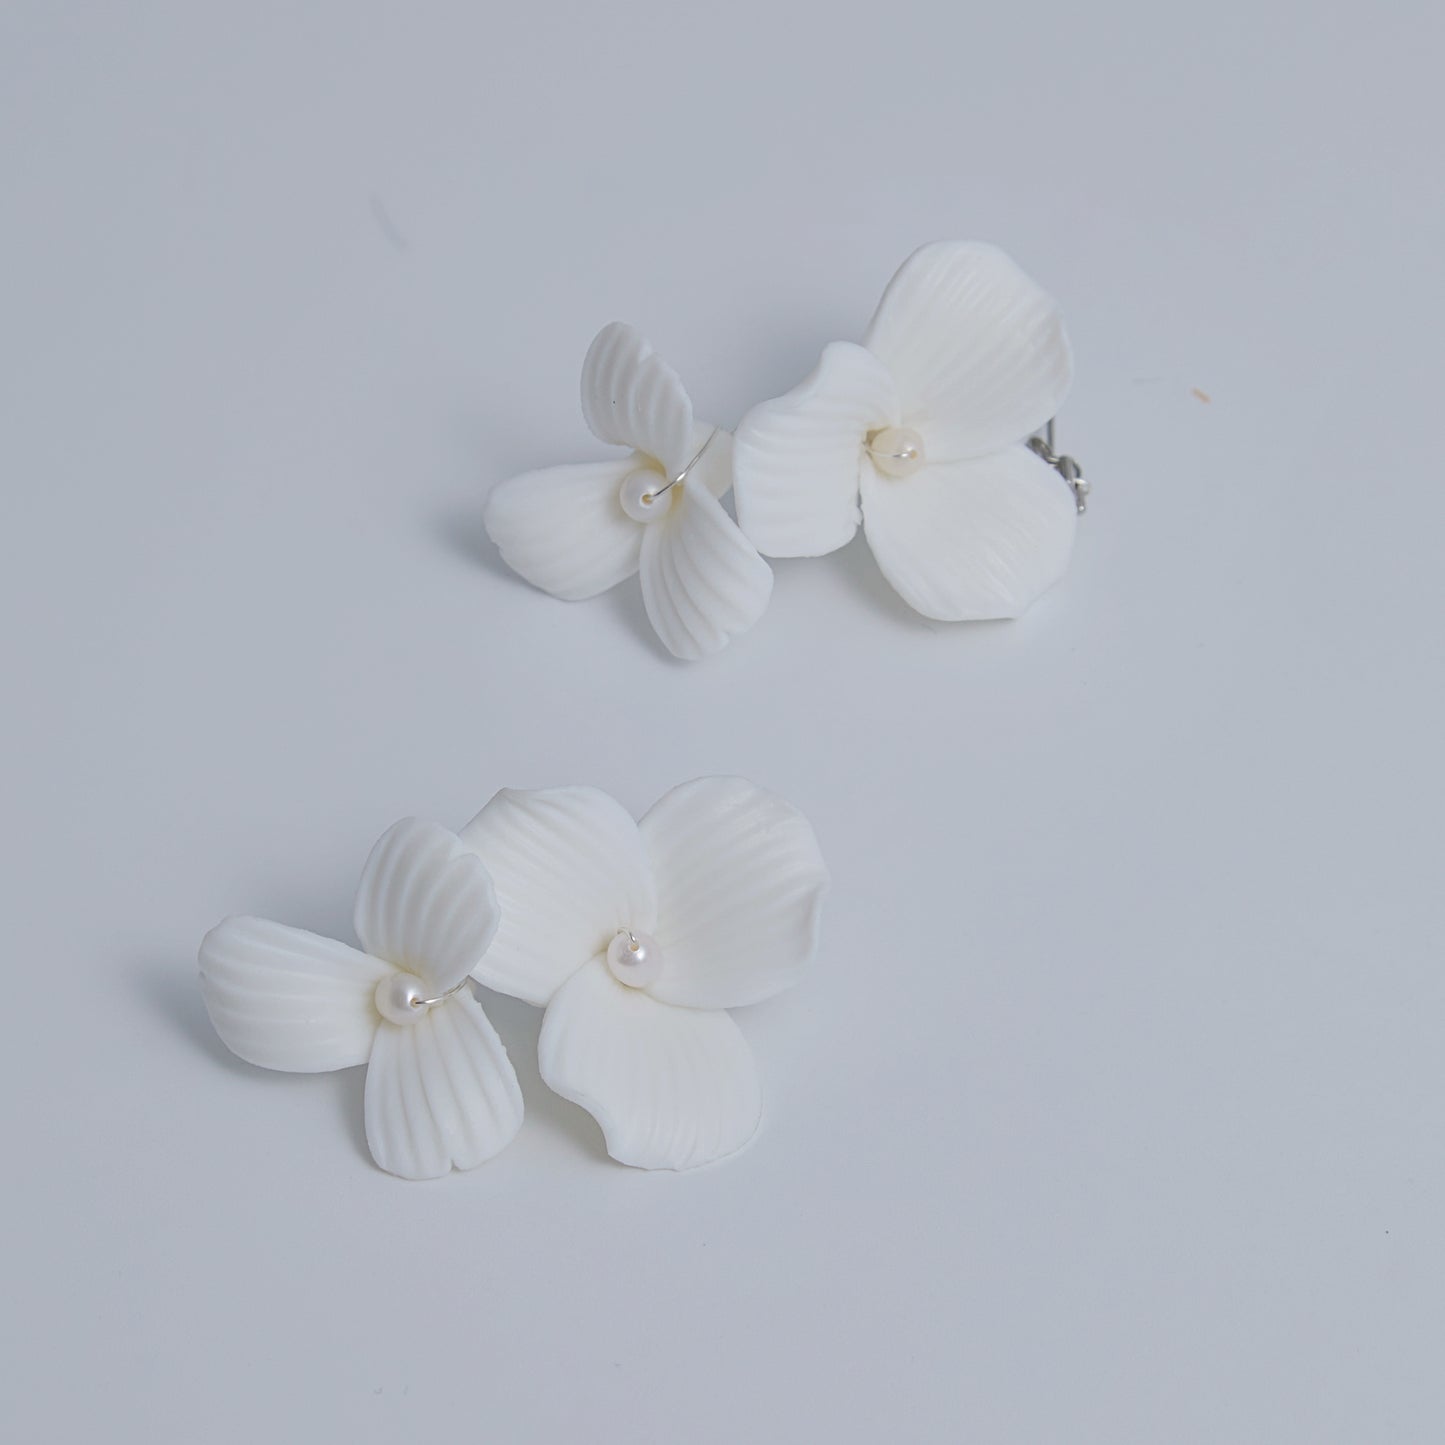 ISABELLA | Flowers and Pearl Wedding Hair Comb, White Porcelain